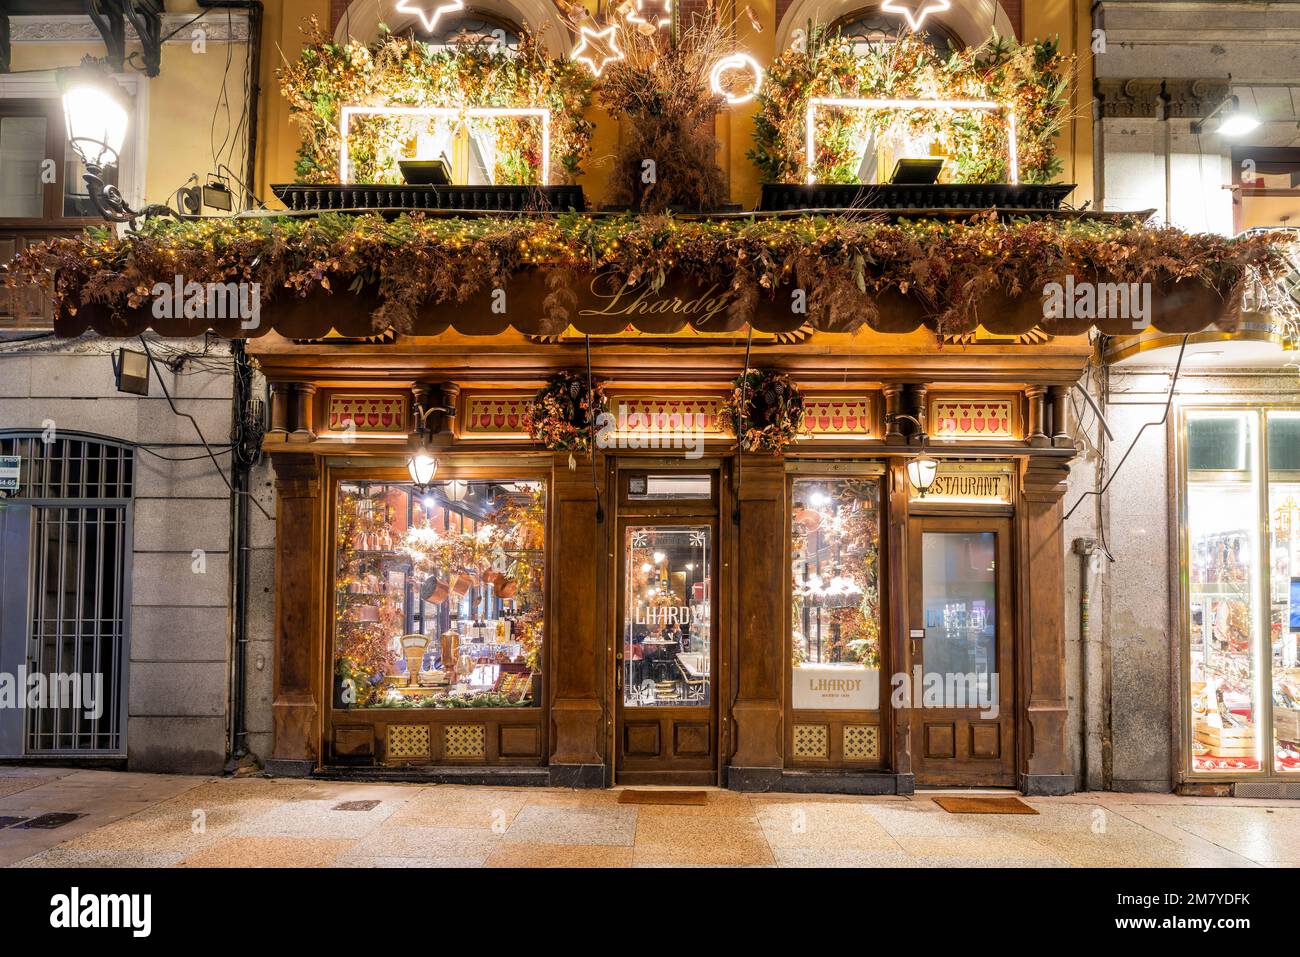 Lhardy restaurant adorned with Christmas lights, Madrid, Spain Stock Photo